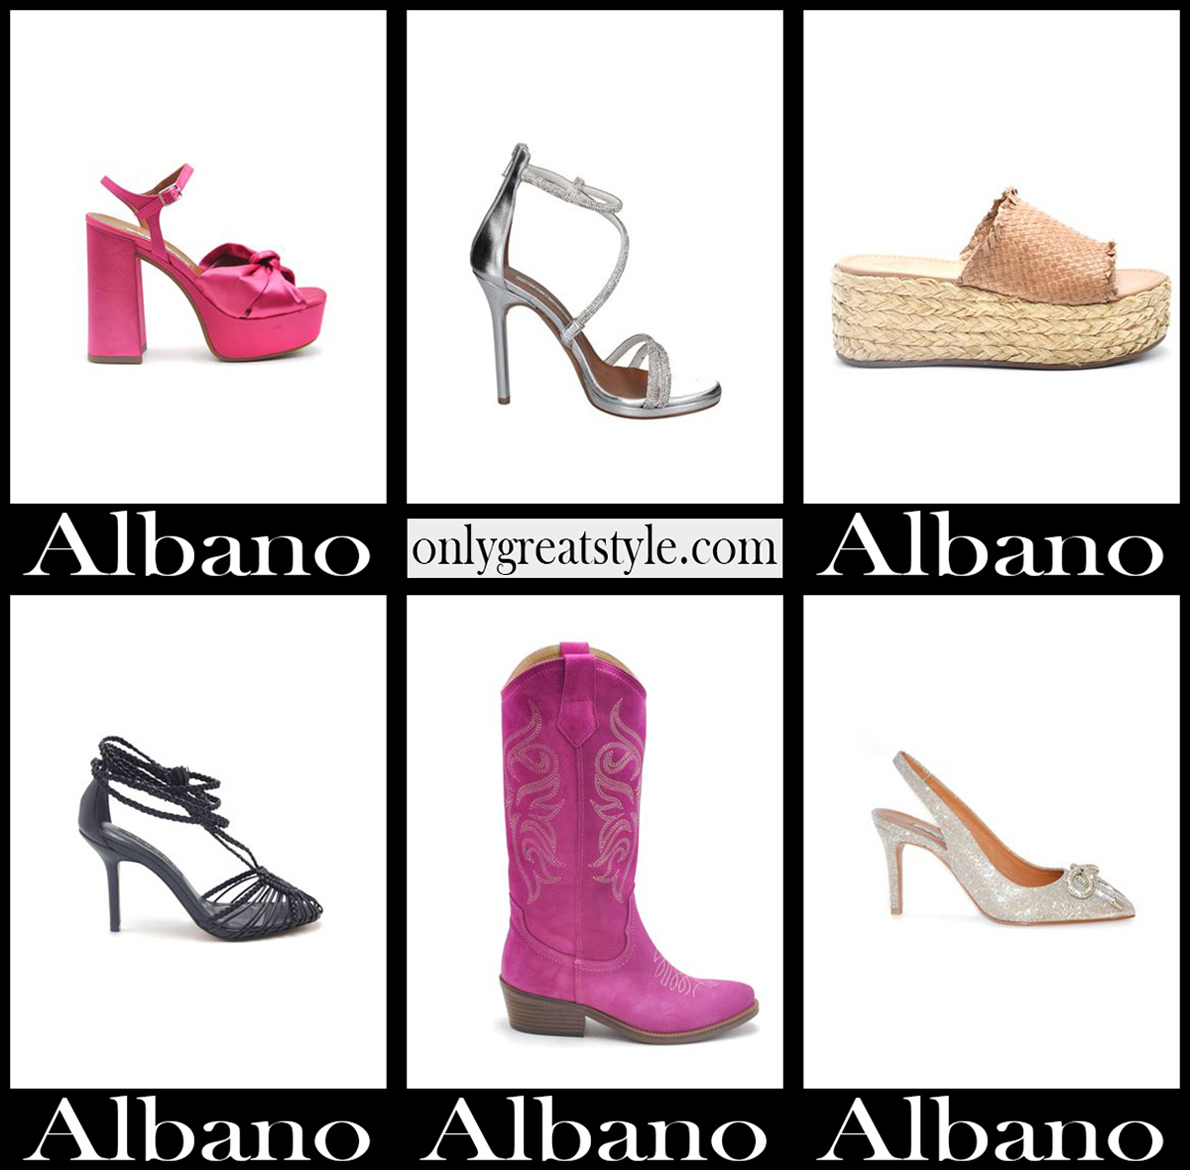 Albano shoes 2022 new arrivals womens footwear